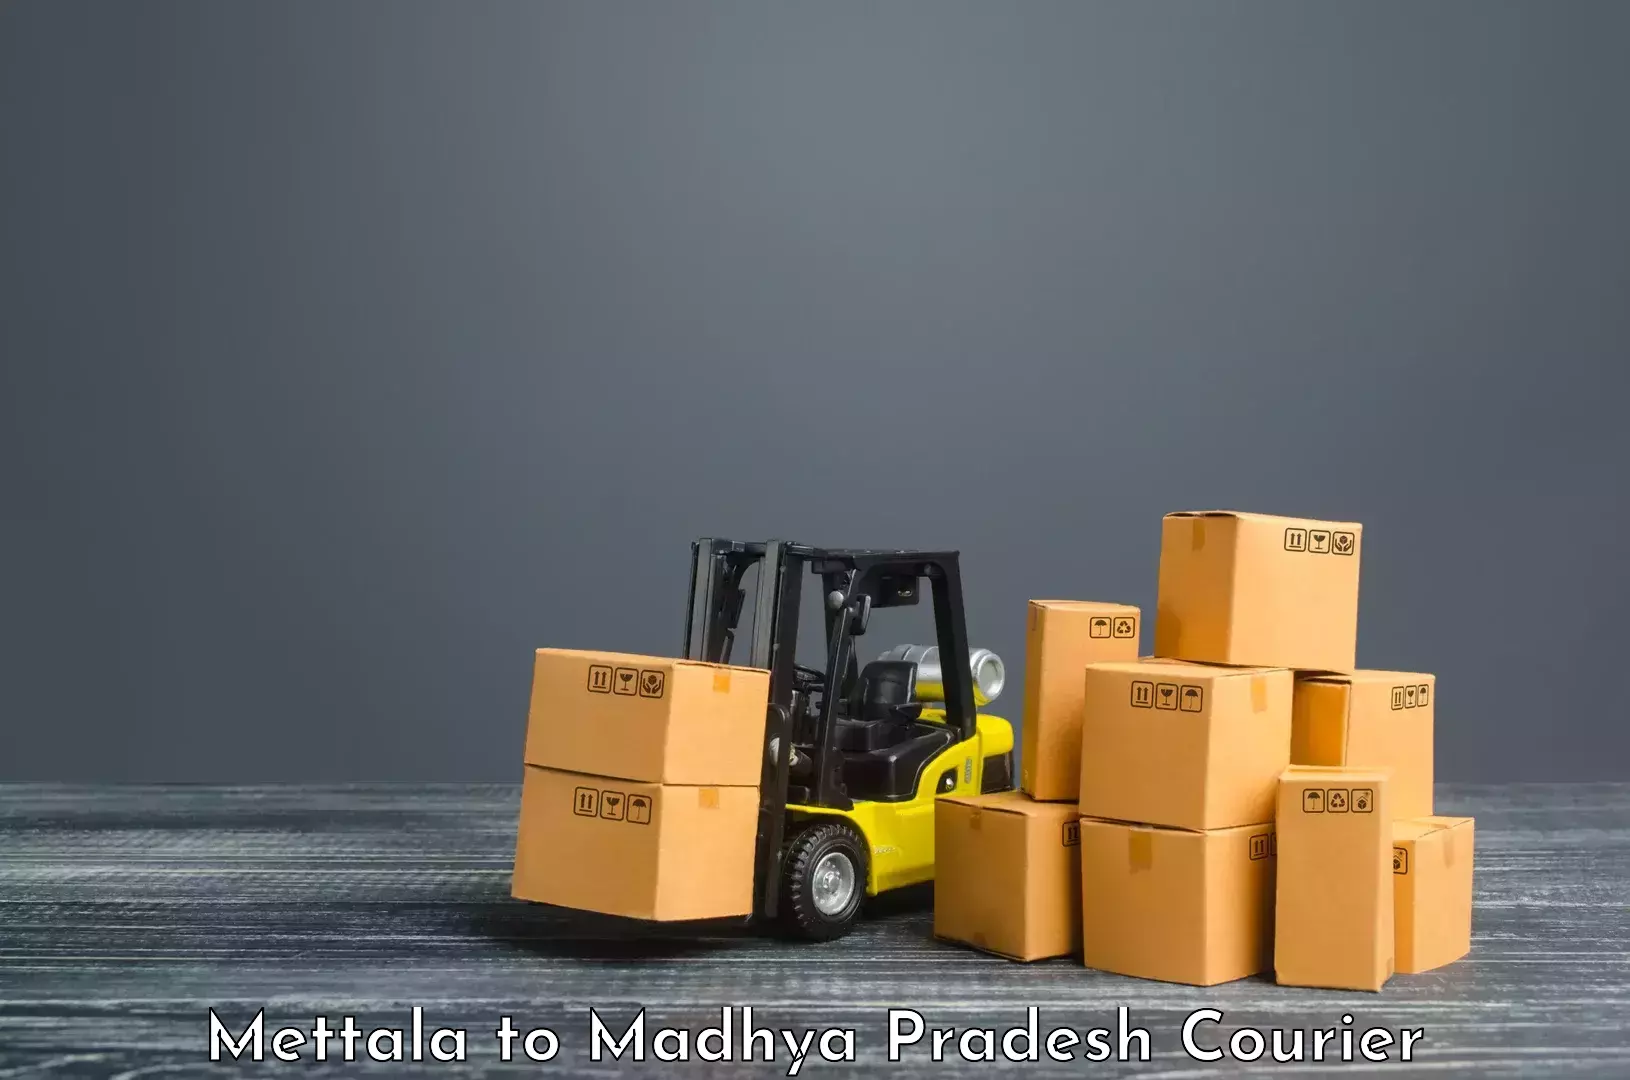 Global shipping solutions Mettala to Ratlam